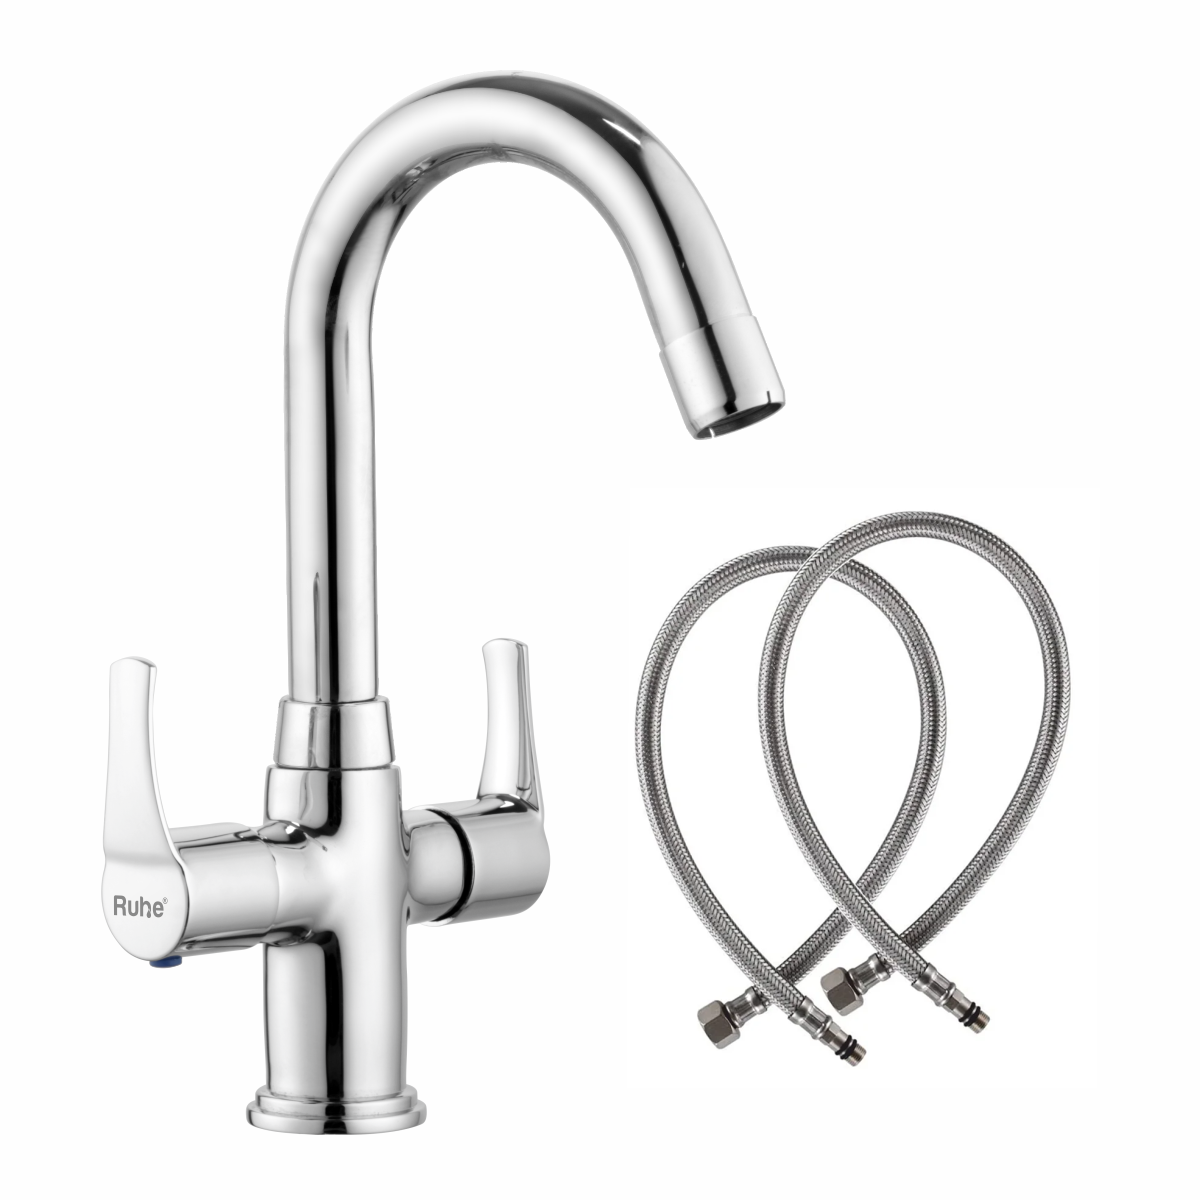 Euphoria Centre Hole Basin Mixer with Small (12 inches) Round Swivel Spout Faucet